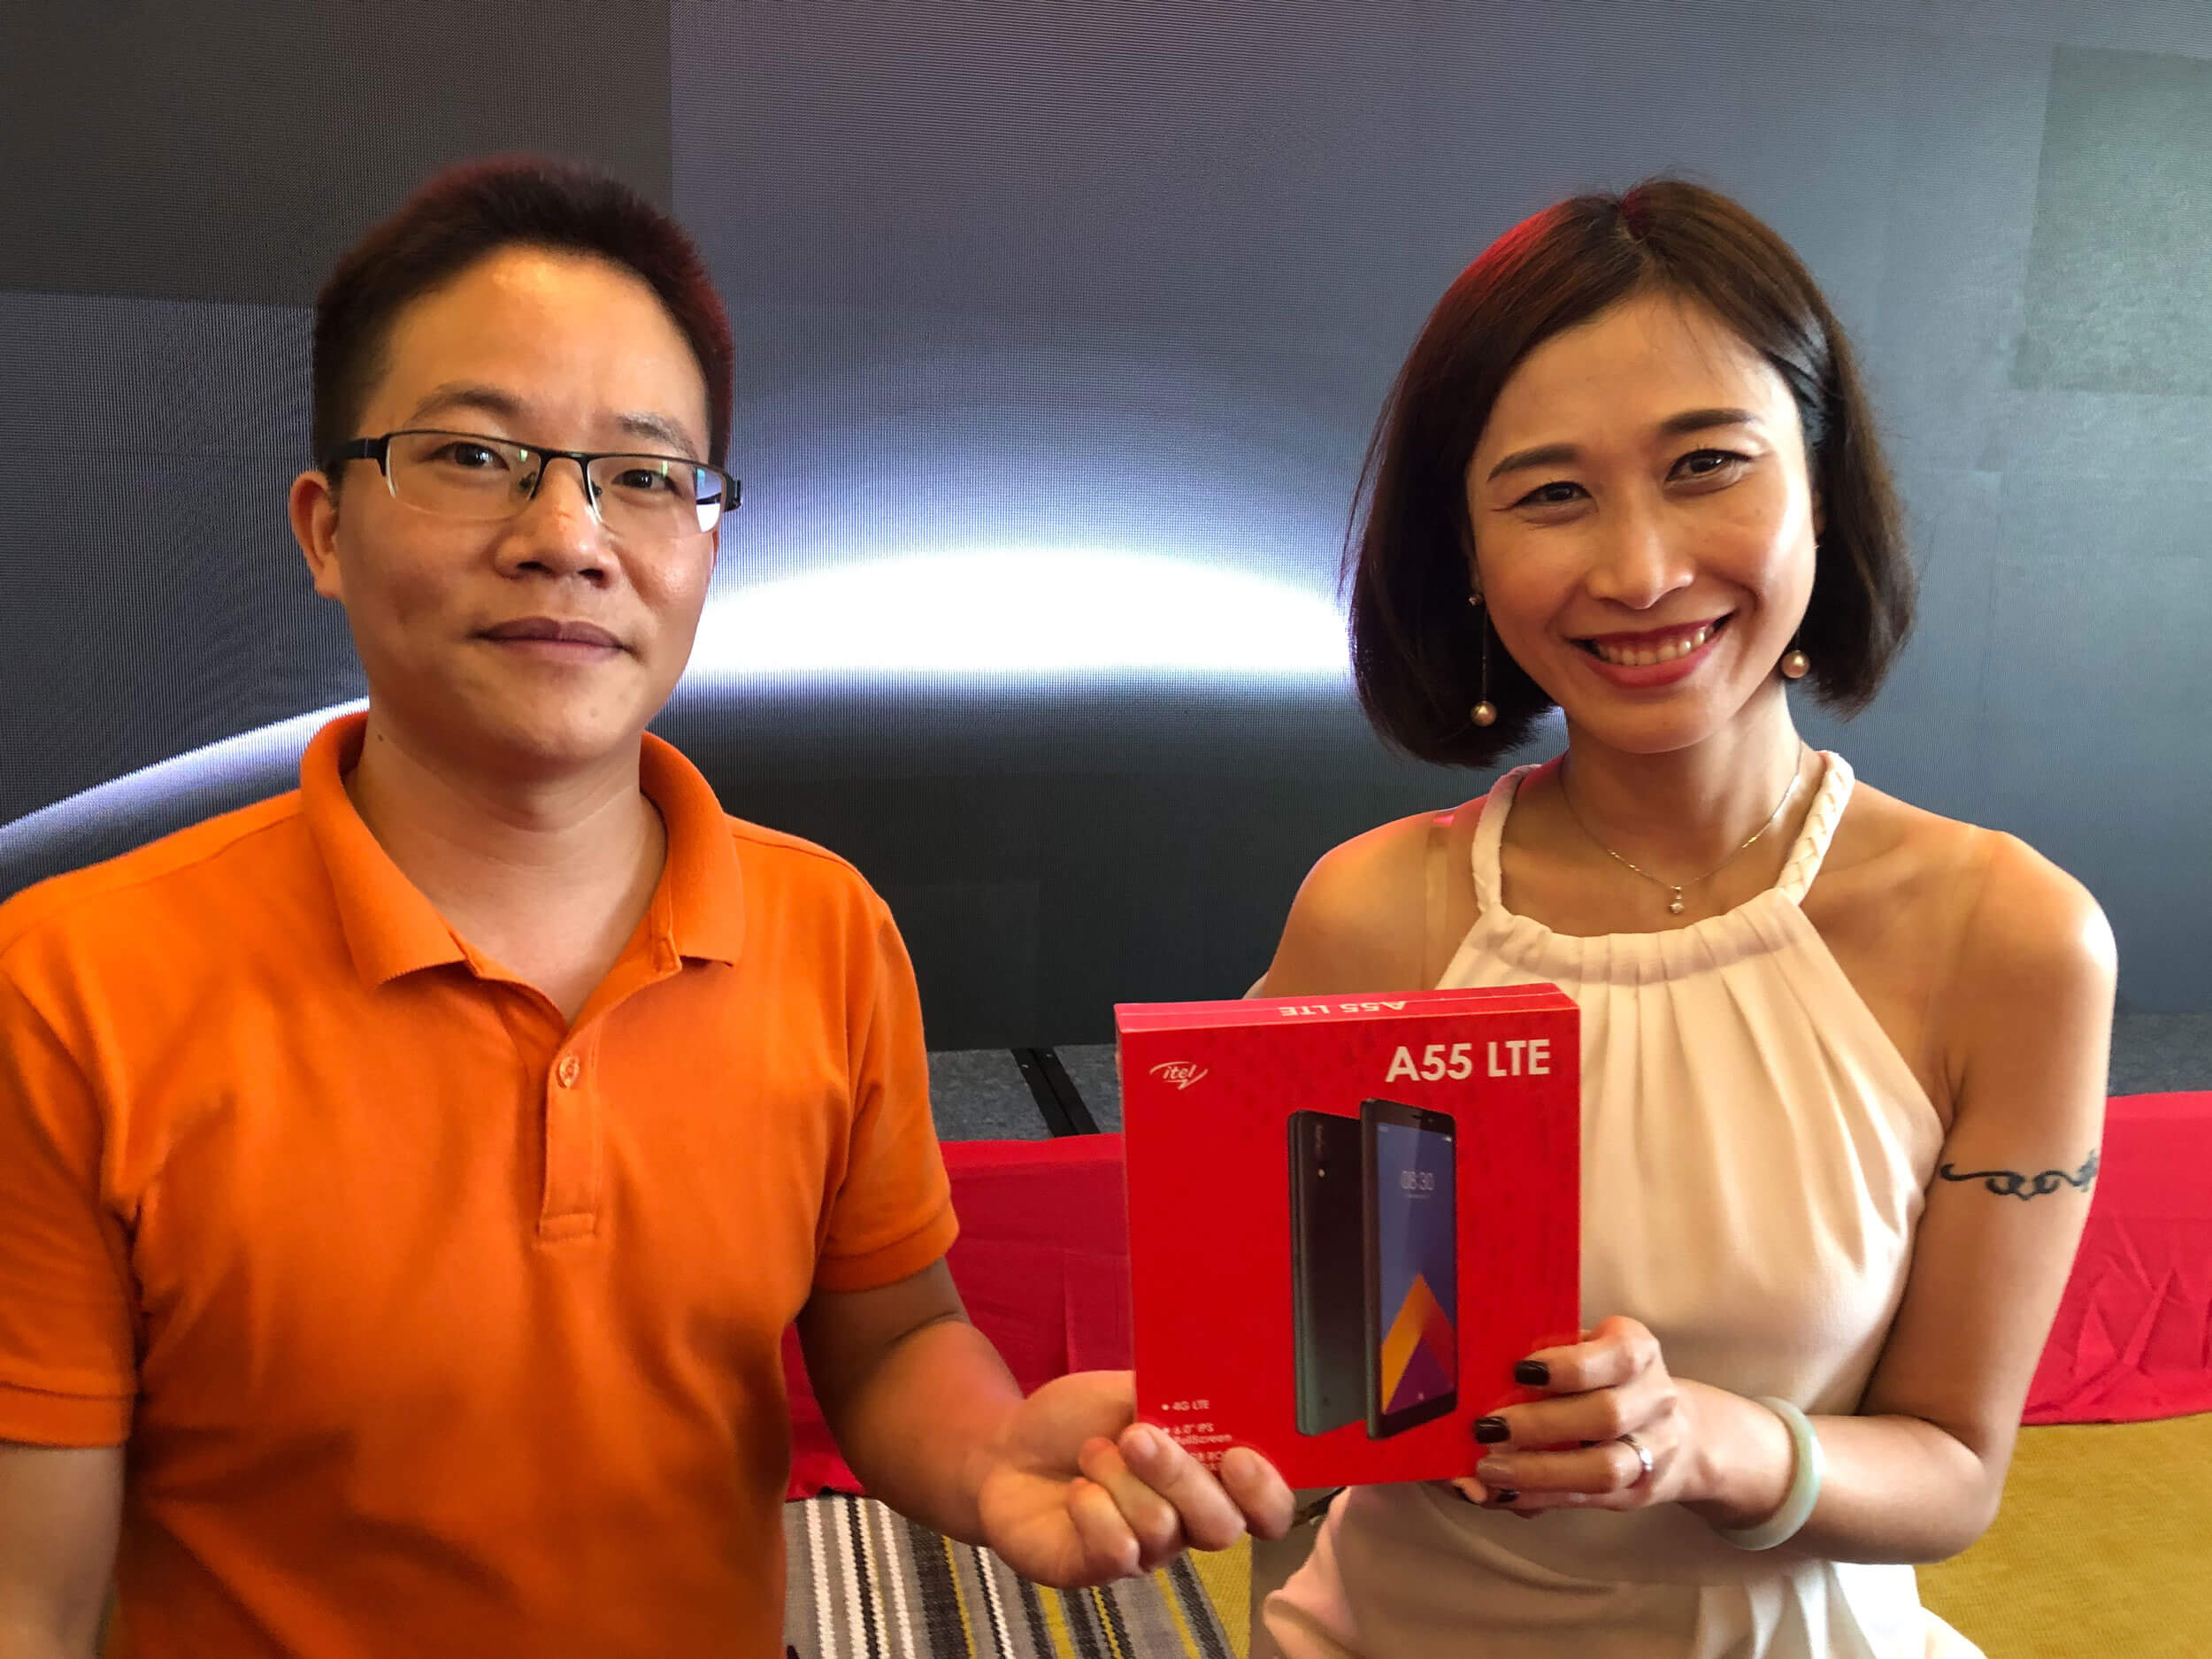 CURRENT FLAGSHIP. Itel Sales Manager Star Luo (left) and Head of Southeast Asia Rachel Wei hold the itel A55, the company’s current flagship device. It has a 6-inch IPS screen, octacore 1.6Ghz processor with 2GB of RAM, 16GB of storage that is upgradeable, and Android 9. The unit sells for P3,600.